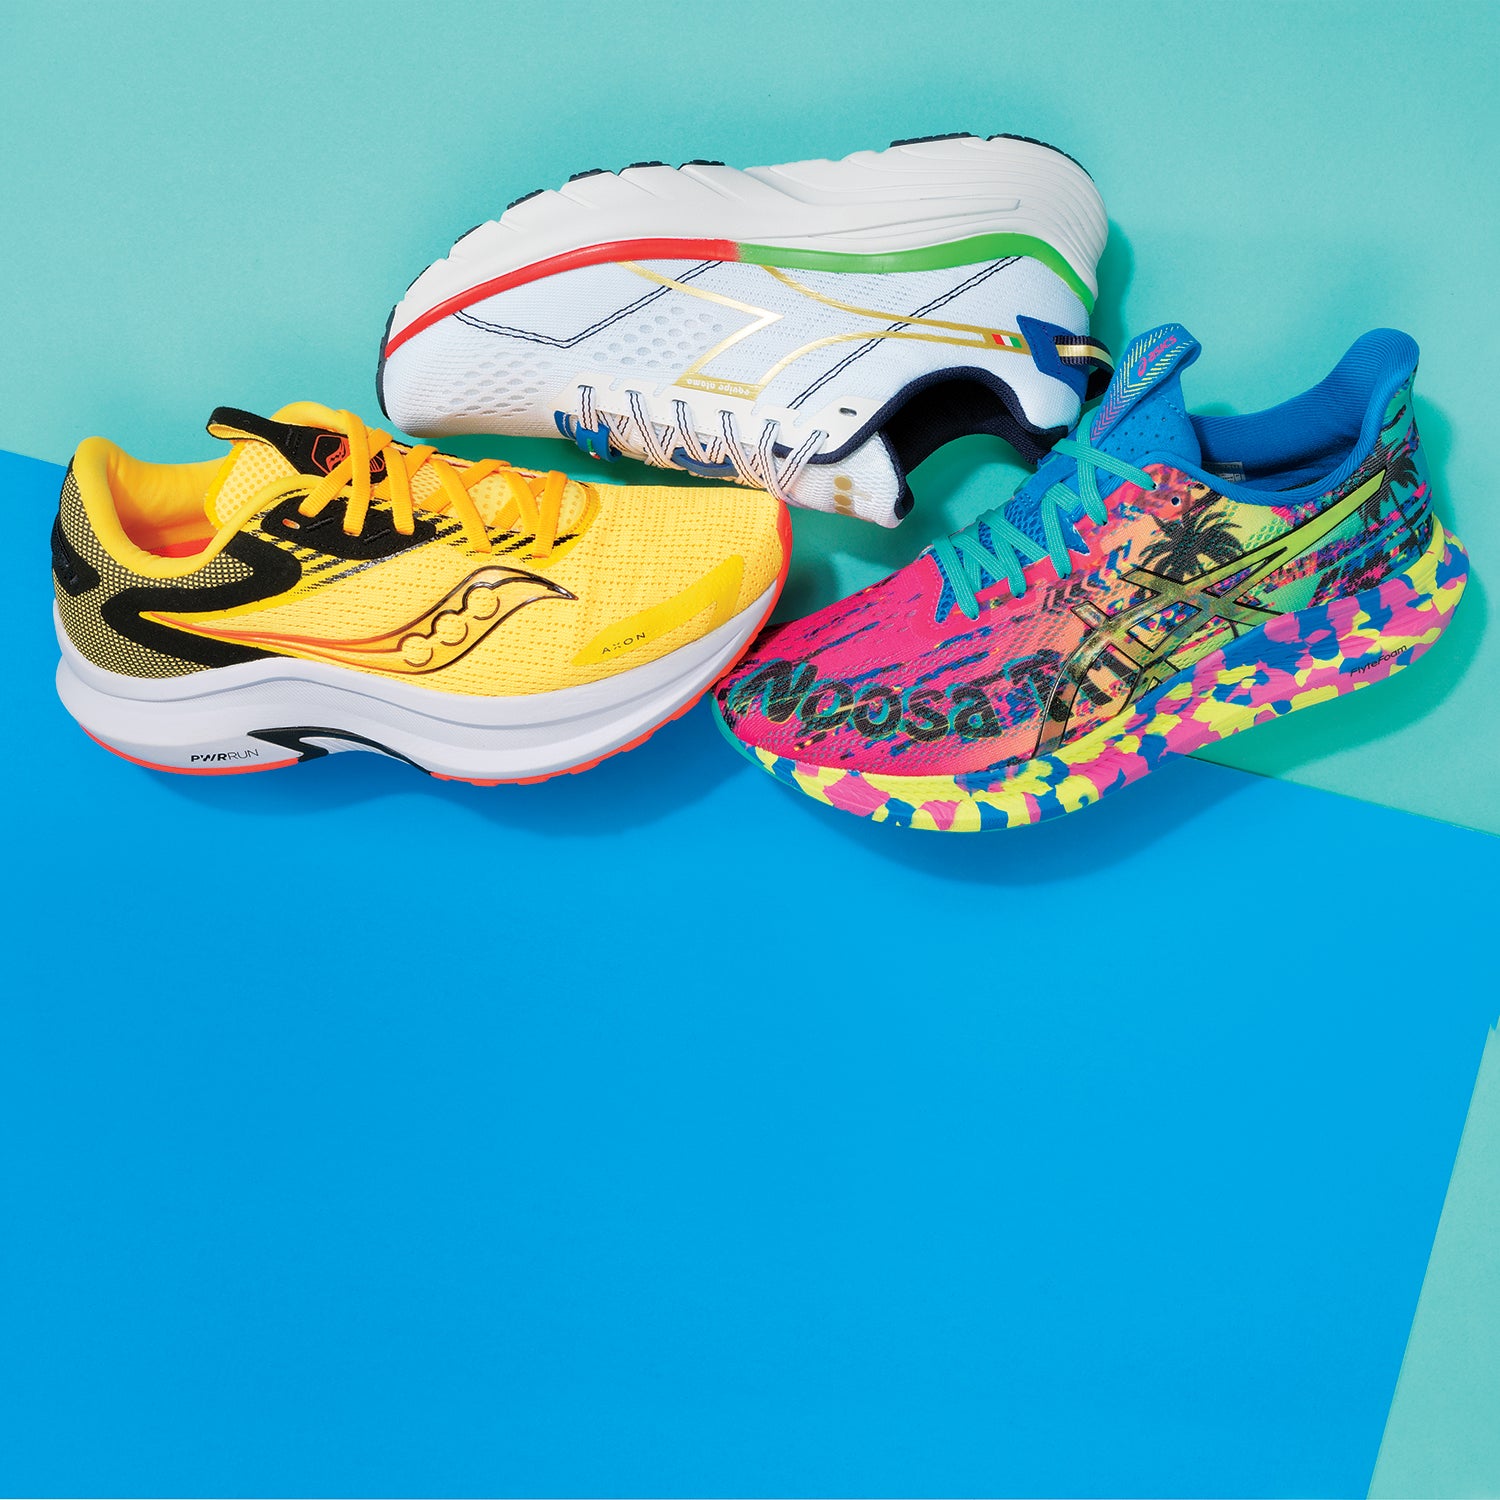 The Best Running Shoes Brands - Global Brands Magazine